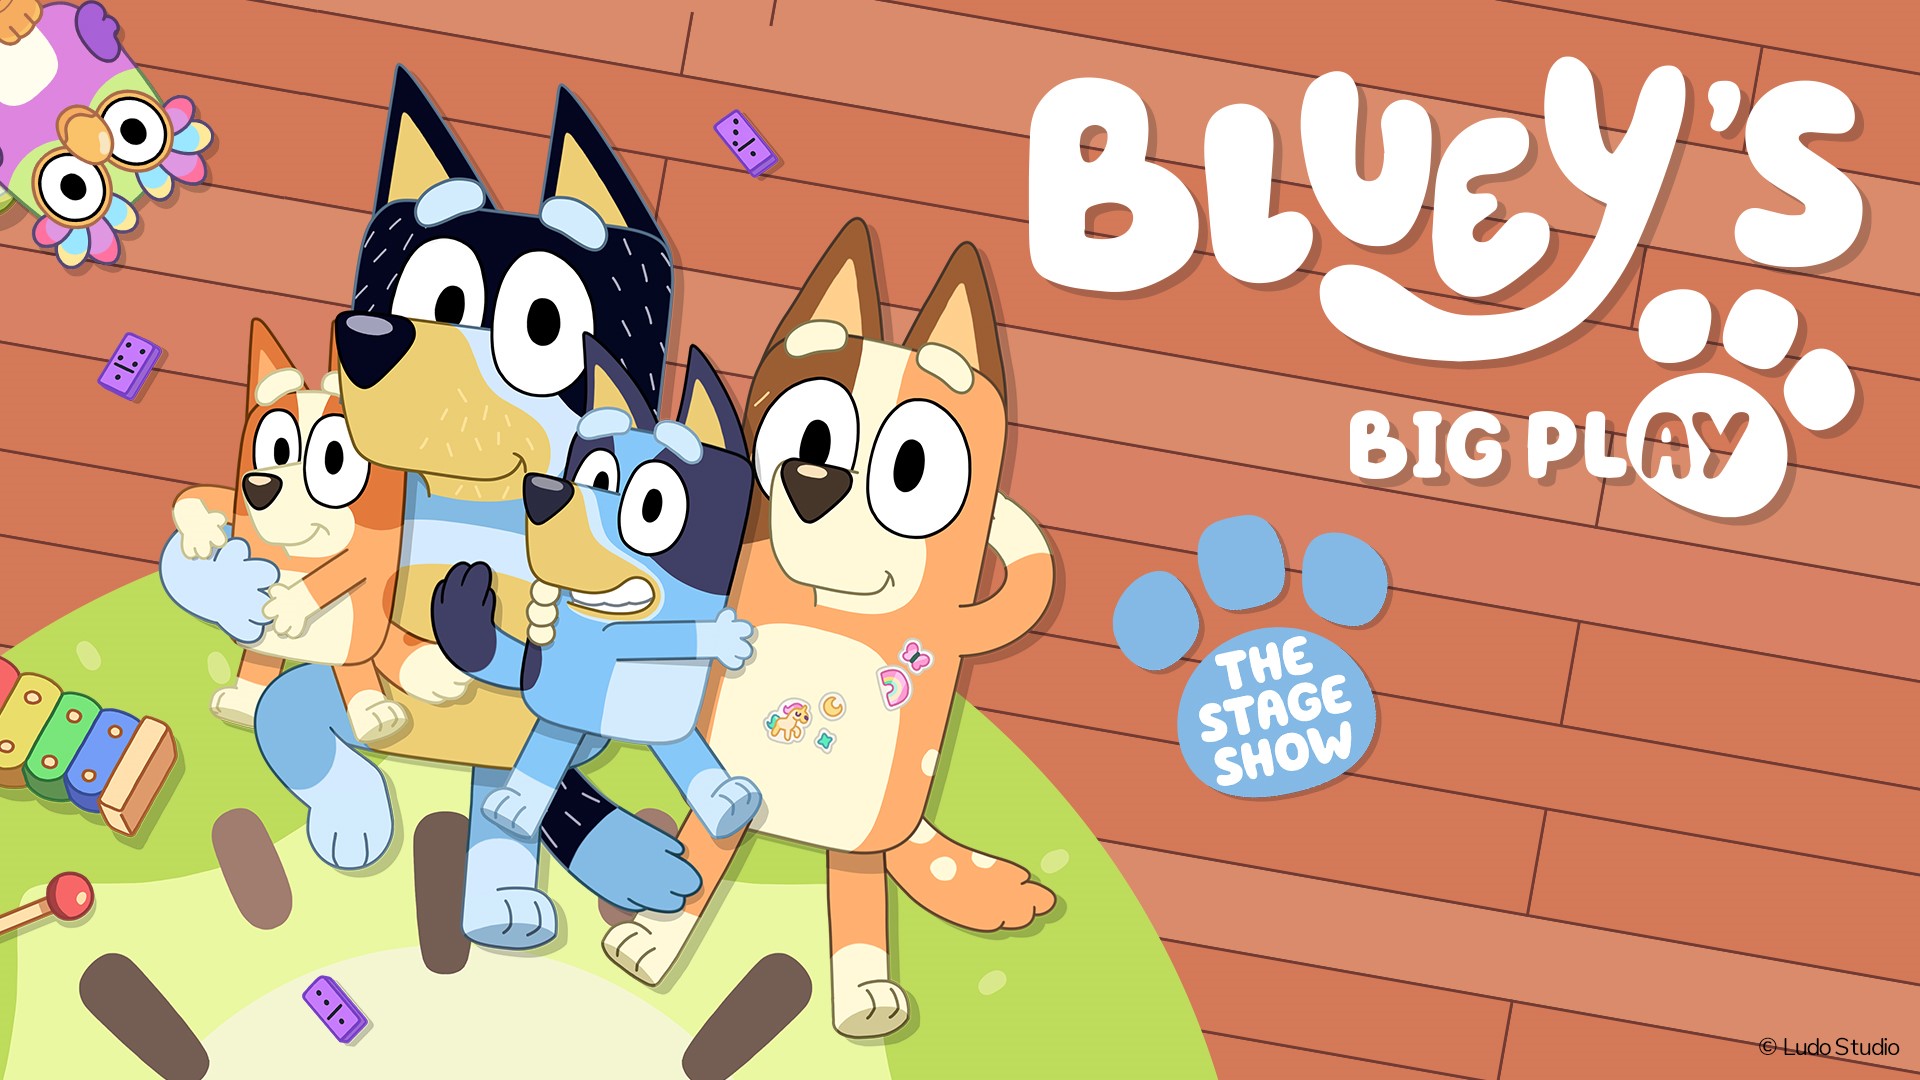 A poster featuring the text "Bluey's Big Play - The Stage Show" and cartoon images of dogs and an owl laying on the a green carpet on a wooden floor.